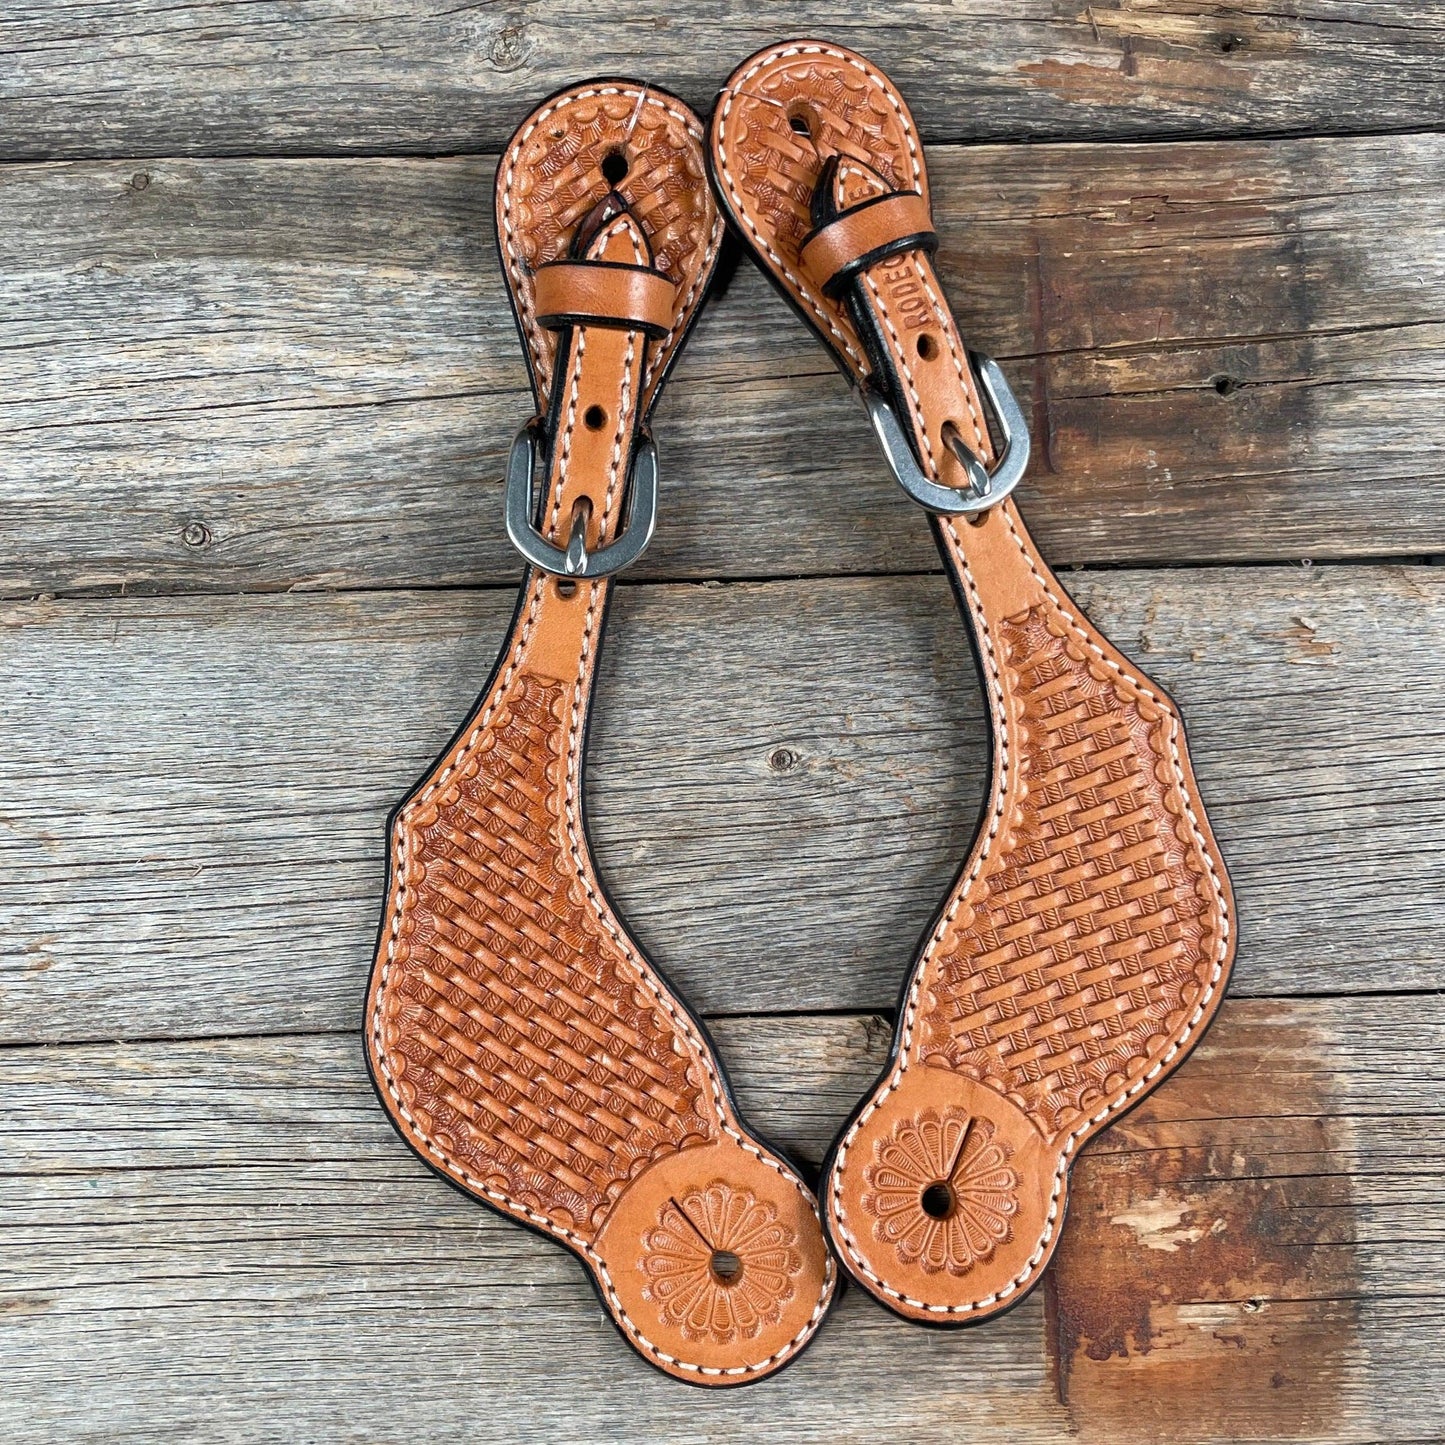 Light Oil Basketweave Tooled Spur Straps - RODEO DRIVE